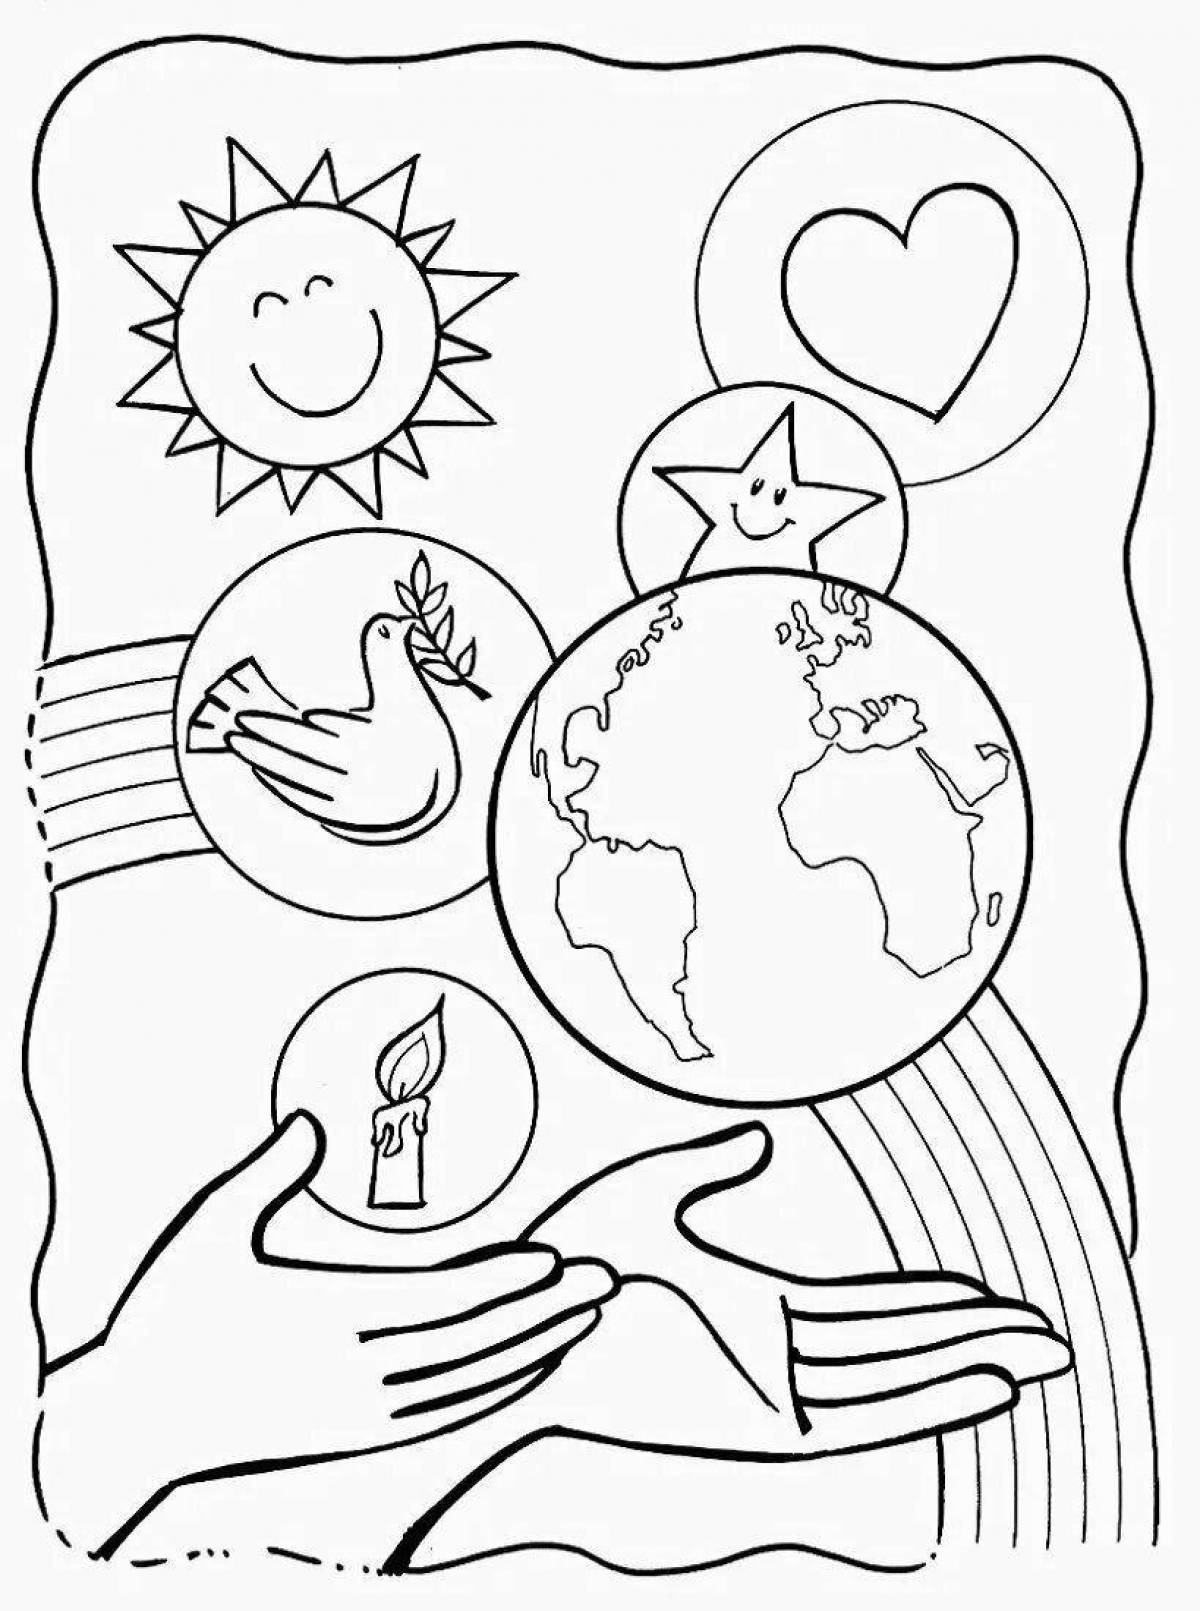 Let there always be peace colorful coloring page